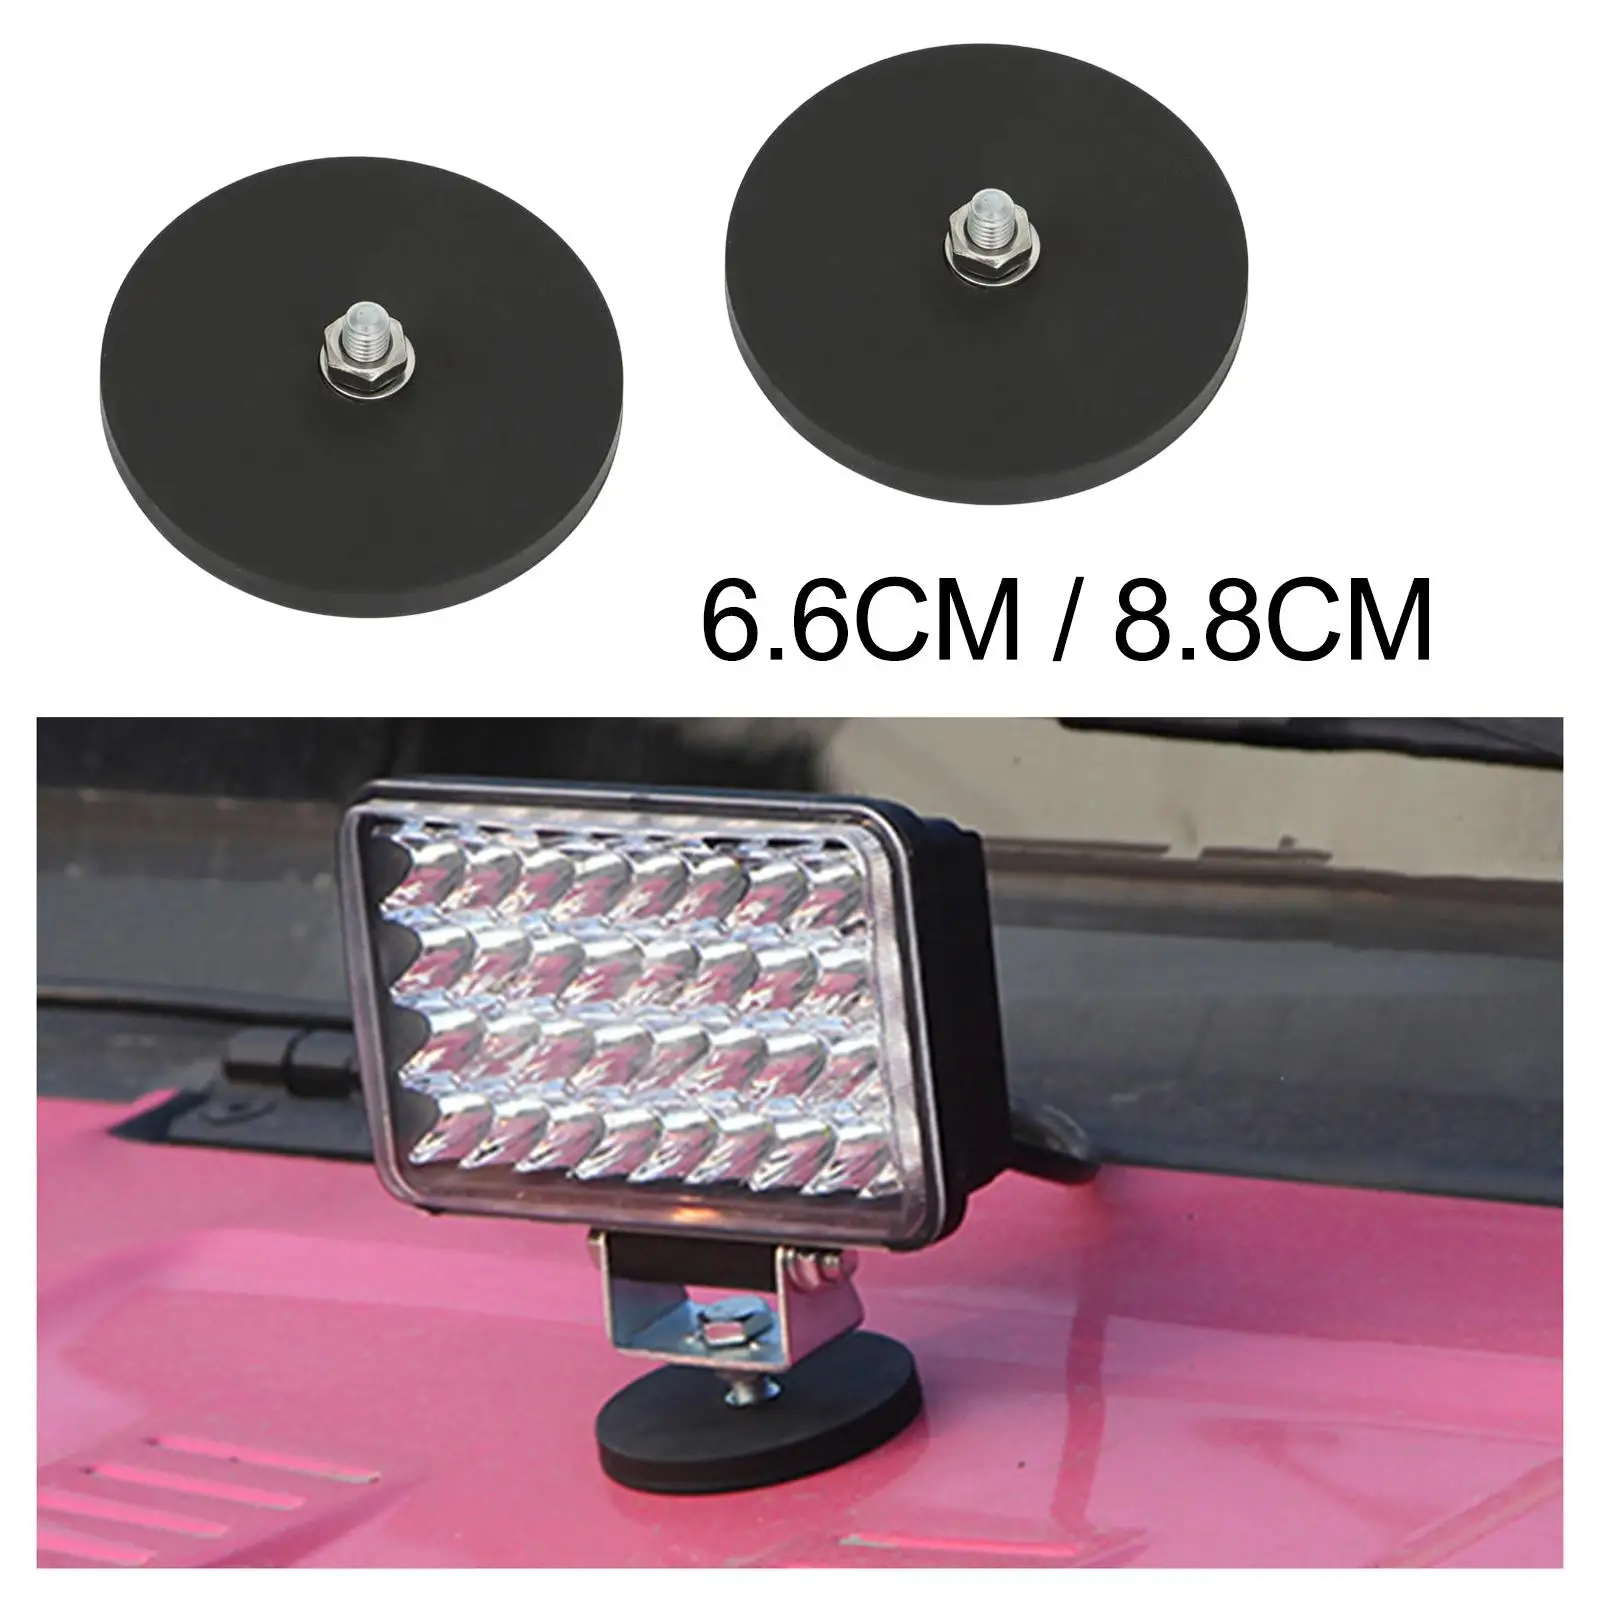 s LED Light Bar Mounting Brackets, with Rubber Pad,  Holder,  Mounting Brackets, Fit for Roof Light Bar, 